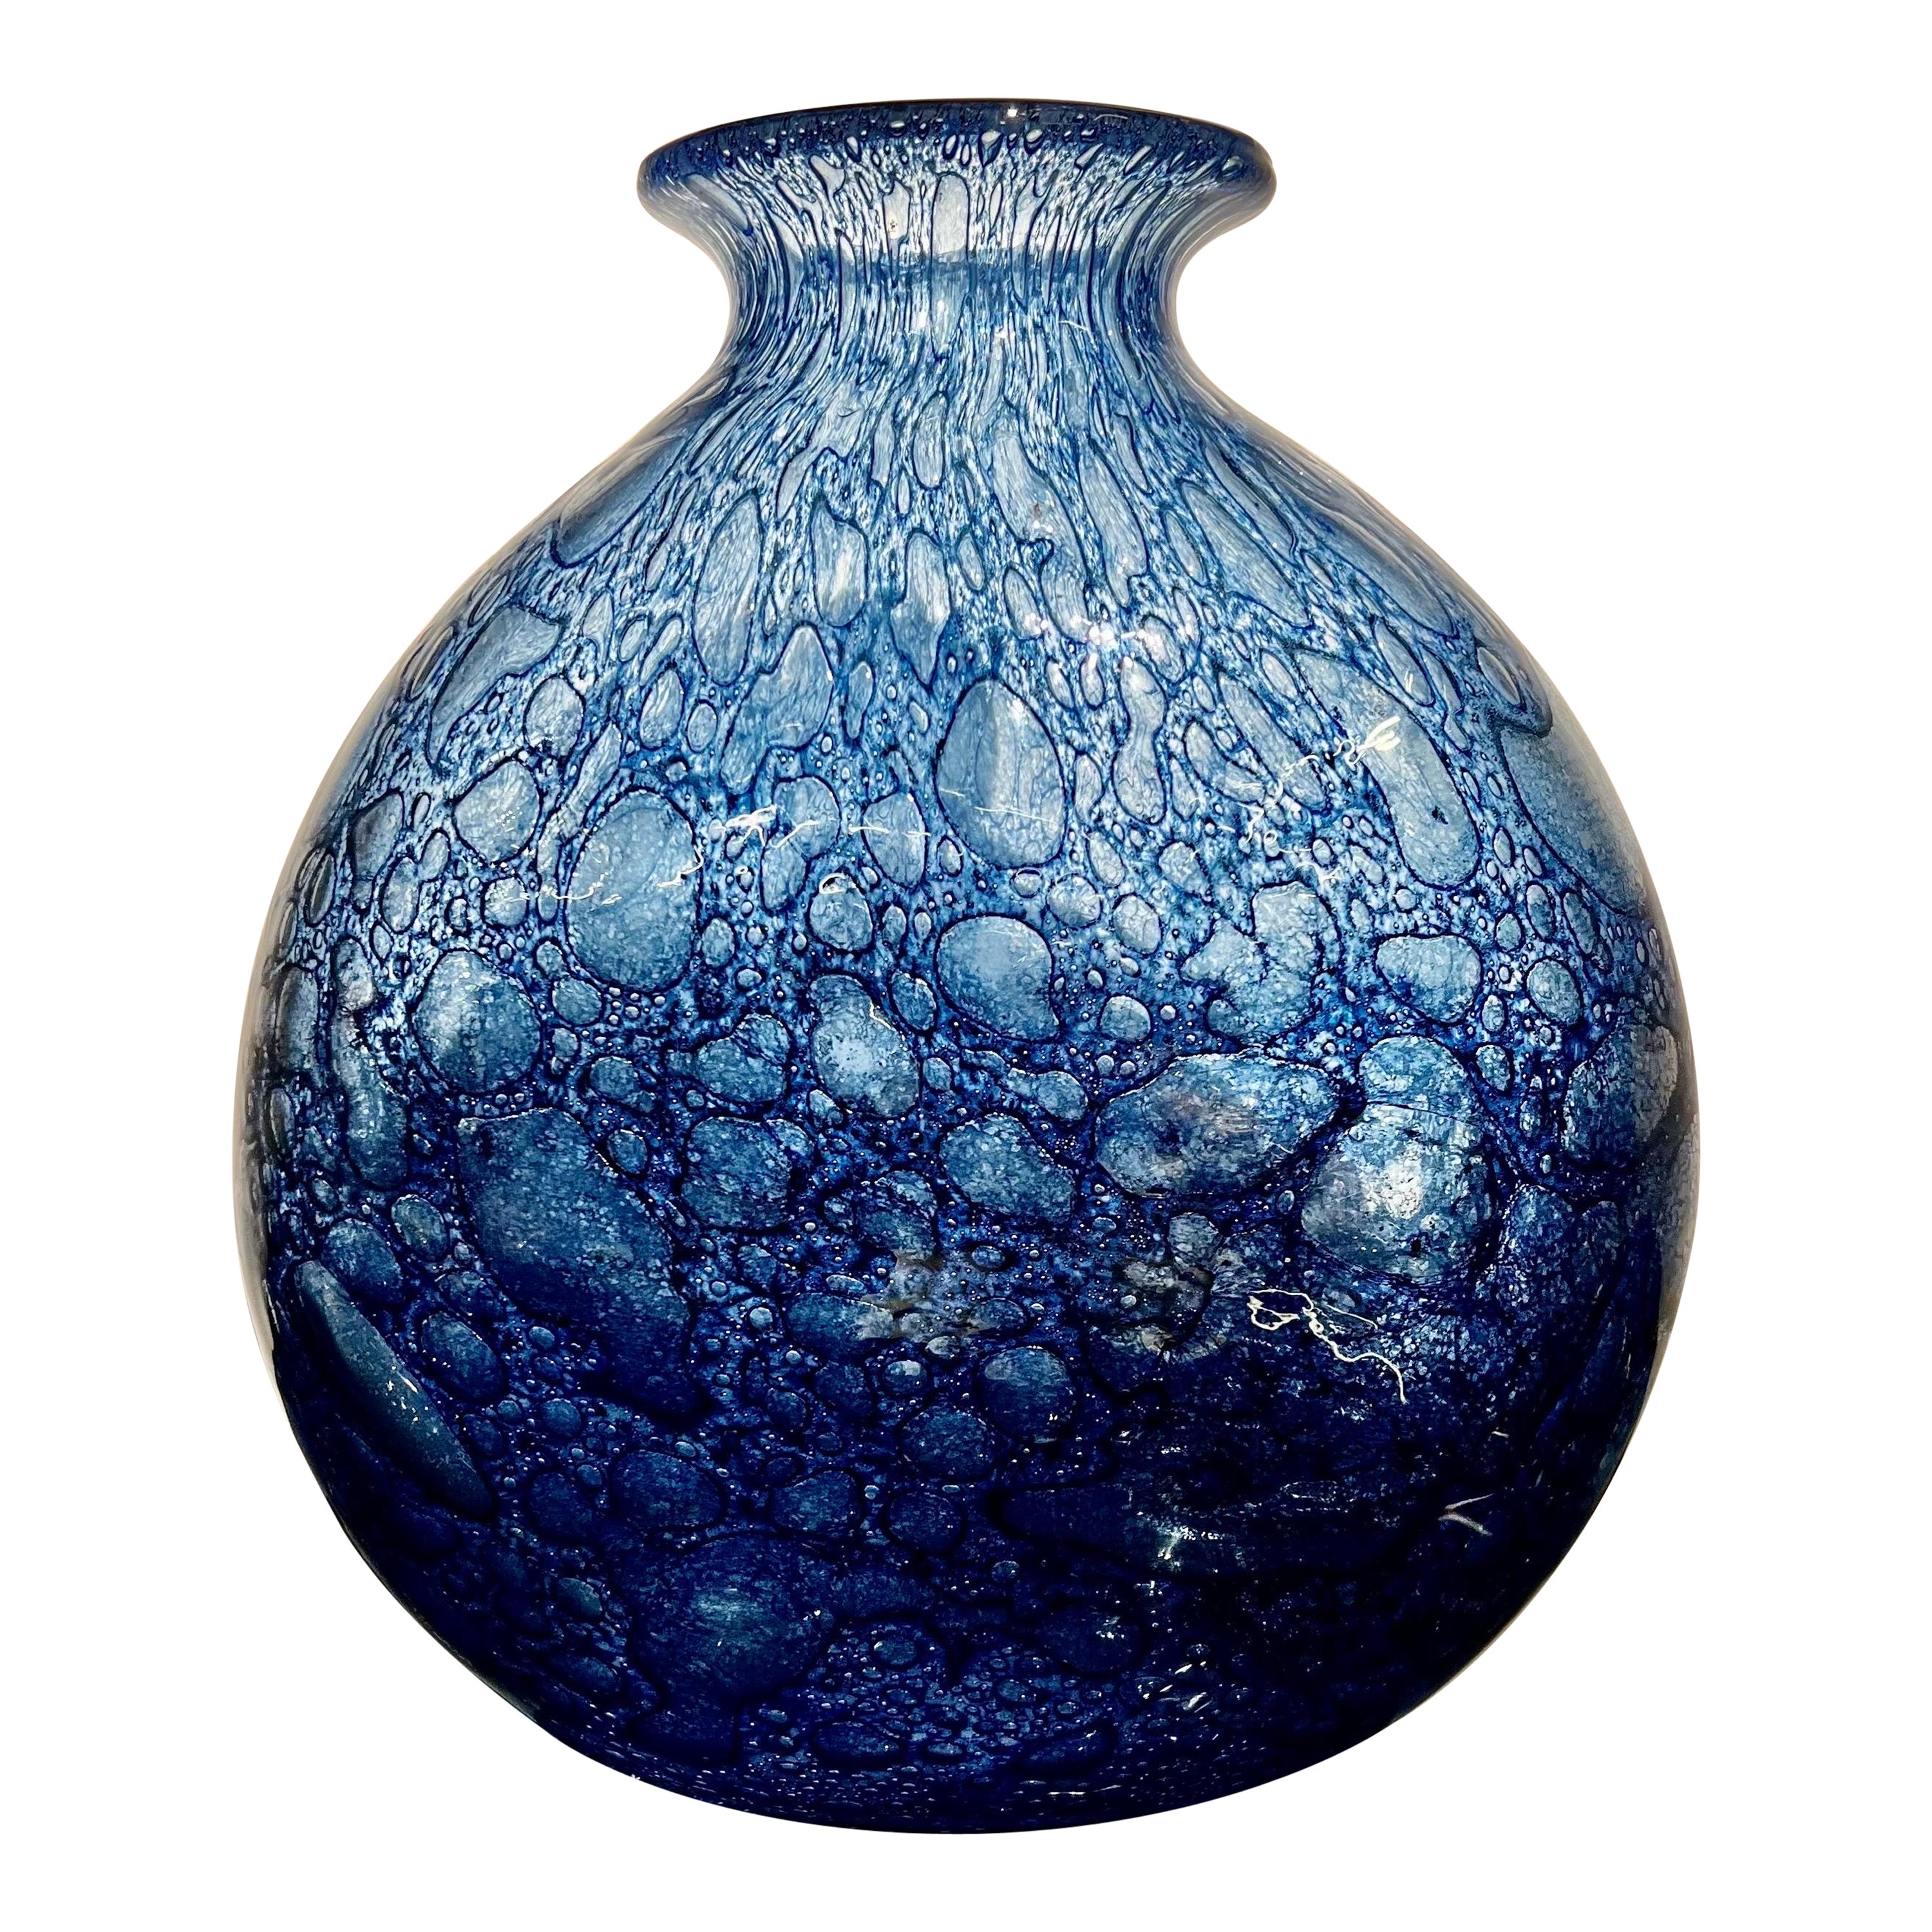 Magnificent Blown-Glass Vase by Ercole Barovier, Italy 1965 For Sale